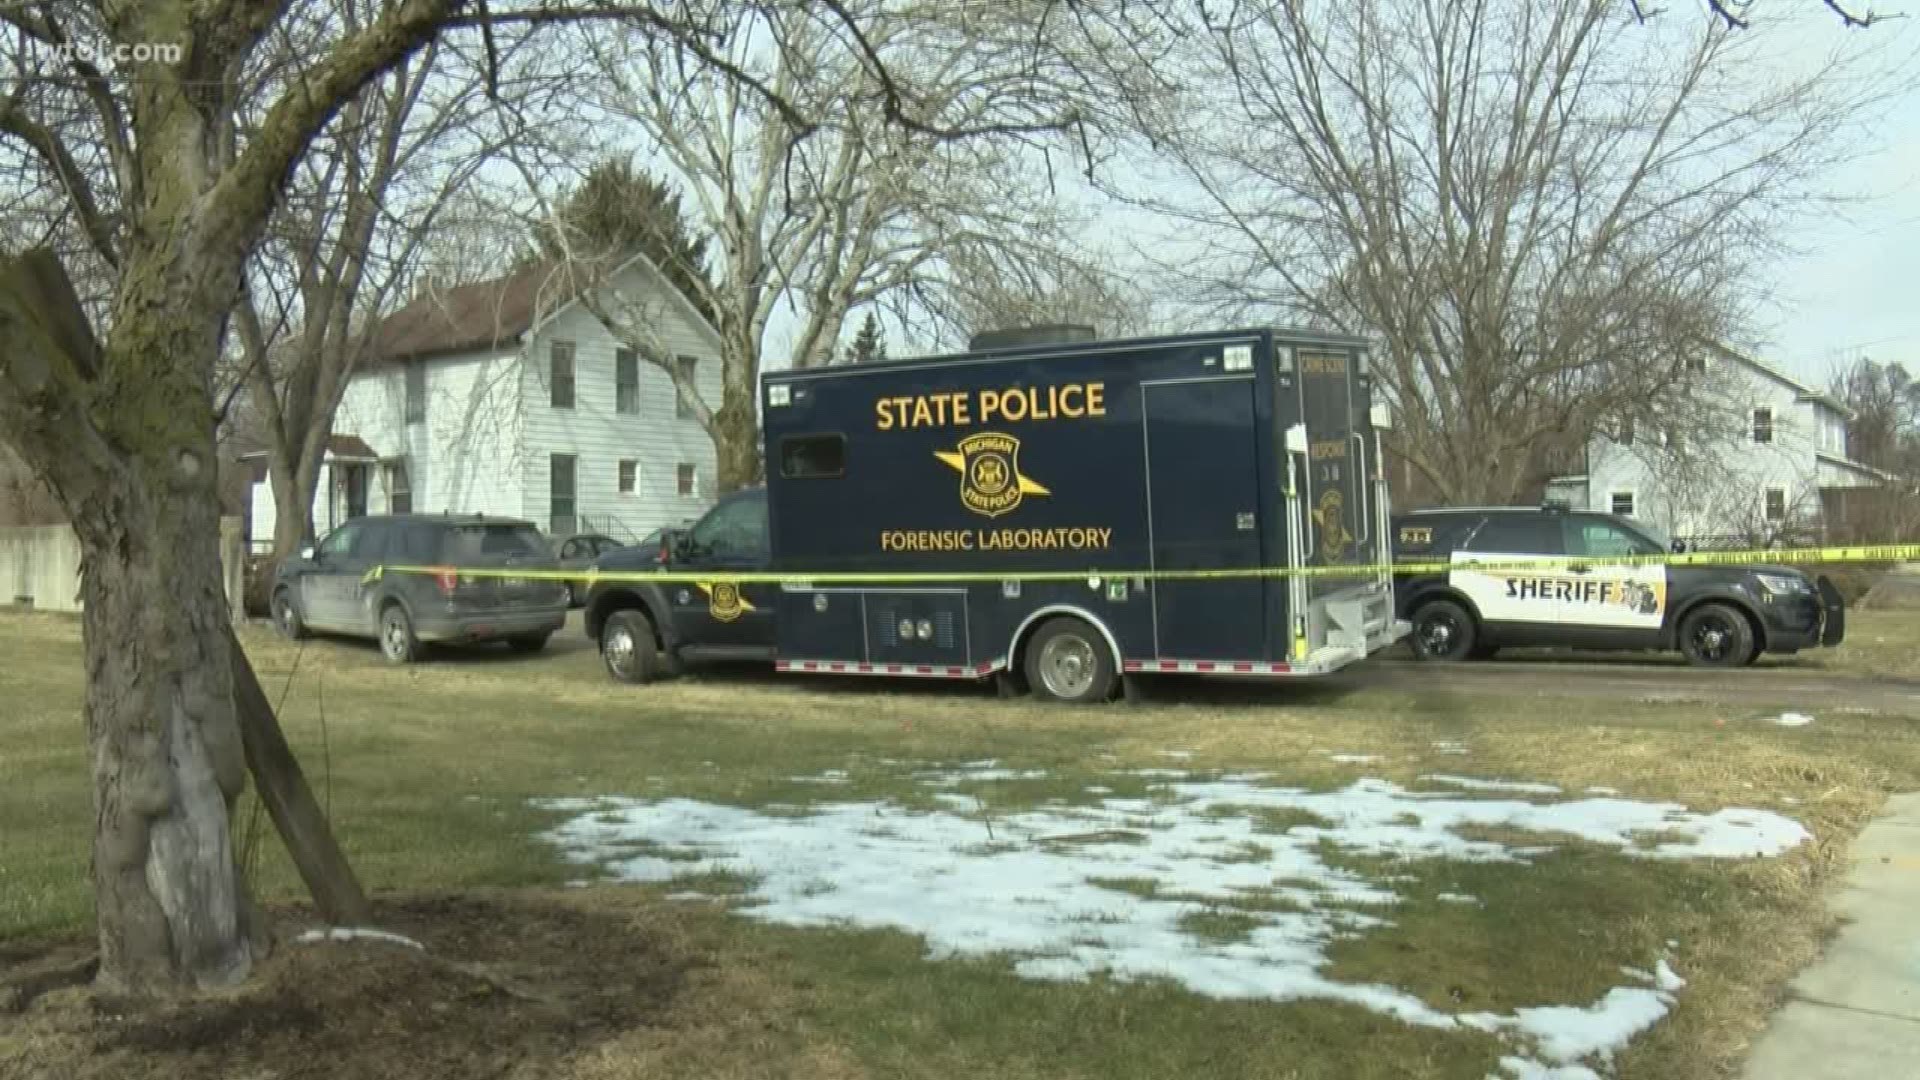 The body was found in a home in the 8800 block of Lewis Ave. in Temperance.